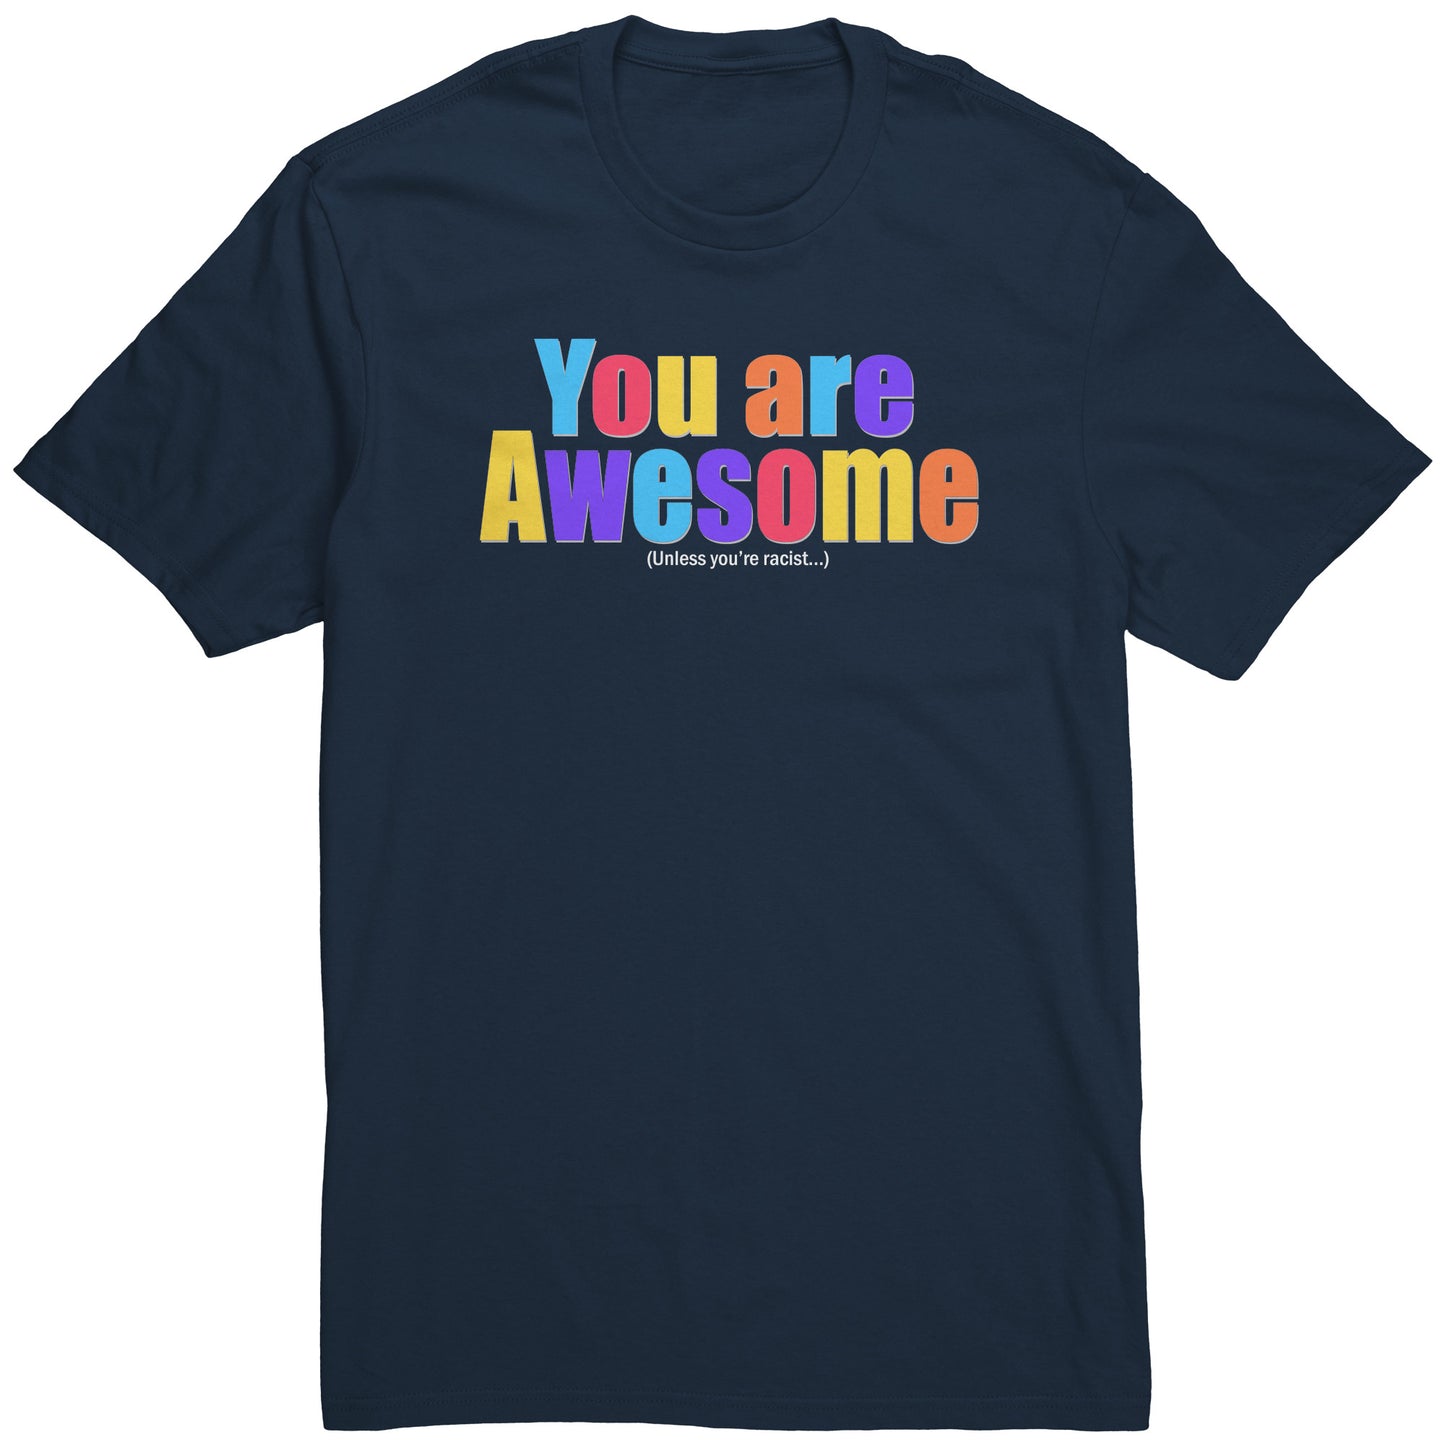 Adult Tee "You Are Awesome Unless" (white print)